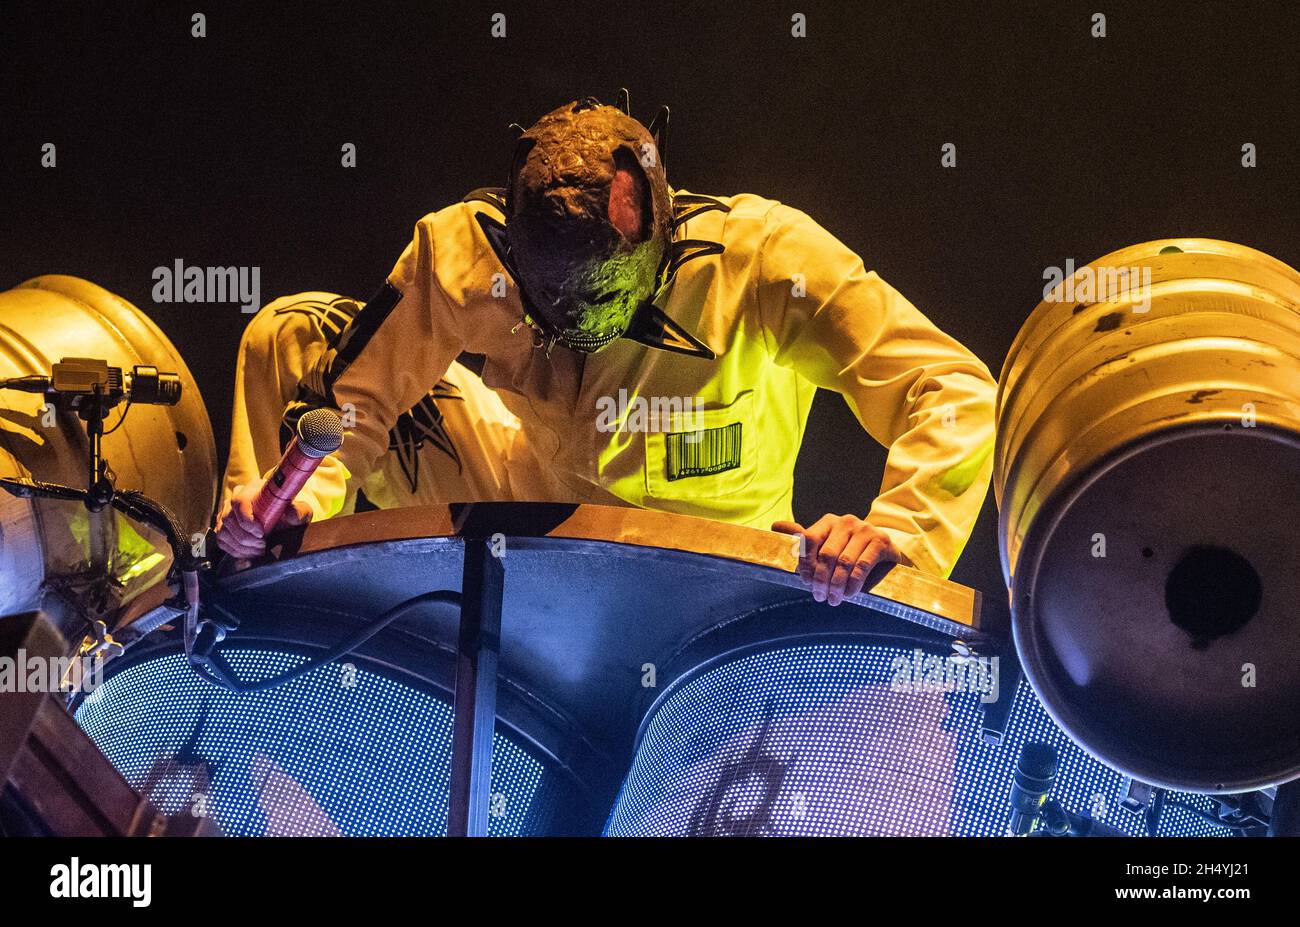 Slipknot's mystery second percussionist performs on stage at Arena Birmingham during We Are Not Your Kind World Tour on 24 January 2020 in Birmingham, UK. Picture date: Friday 24 January 2020. Photo credit: Katja Ogrin/EMPICS Entertainment. EDITORIAL USE ONLY Stock Photo